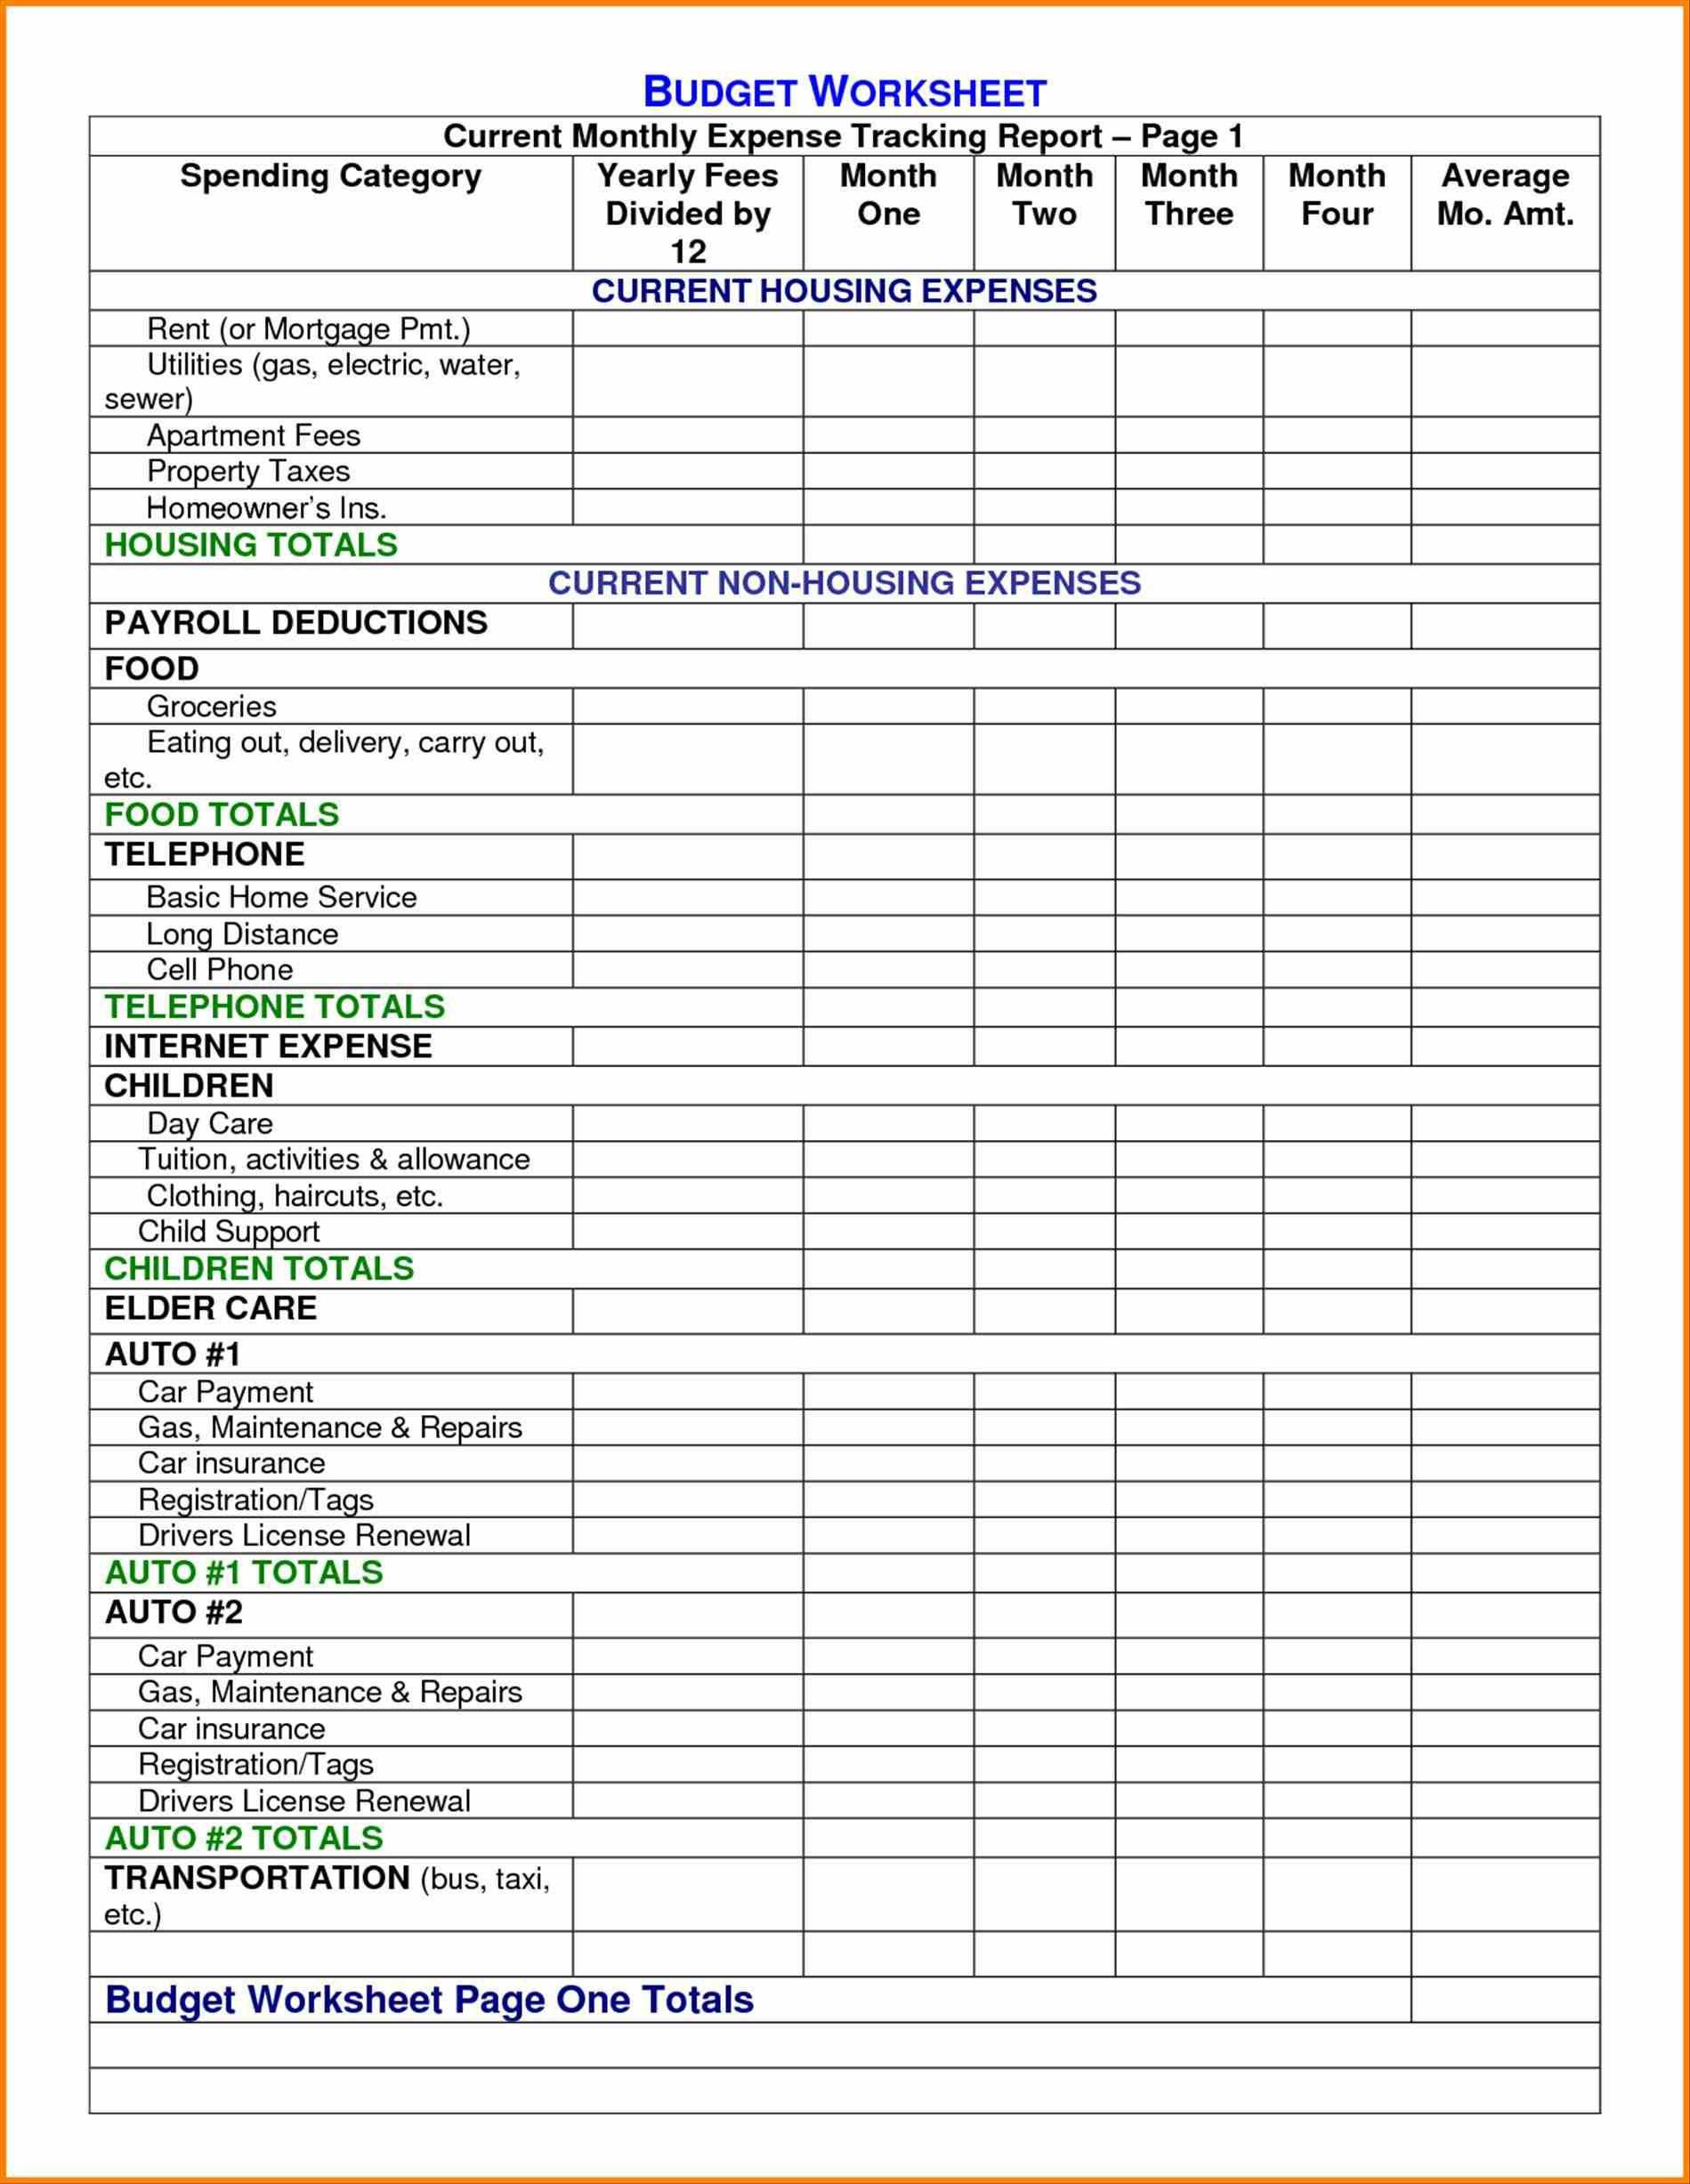 Excel Sheeting System Spreadsheet Pdf Ratios Free Uk Simple In Accounting Spreadsheet In Pdf